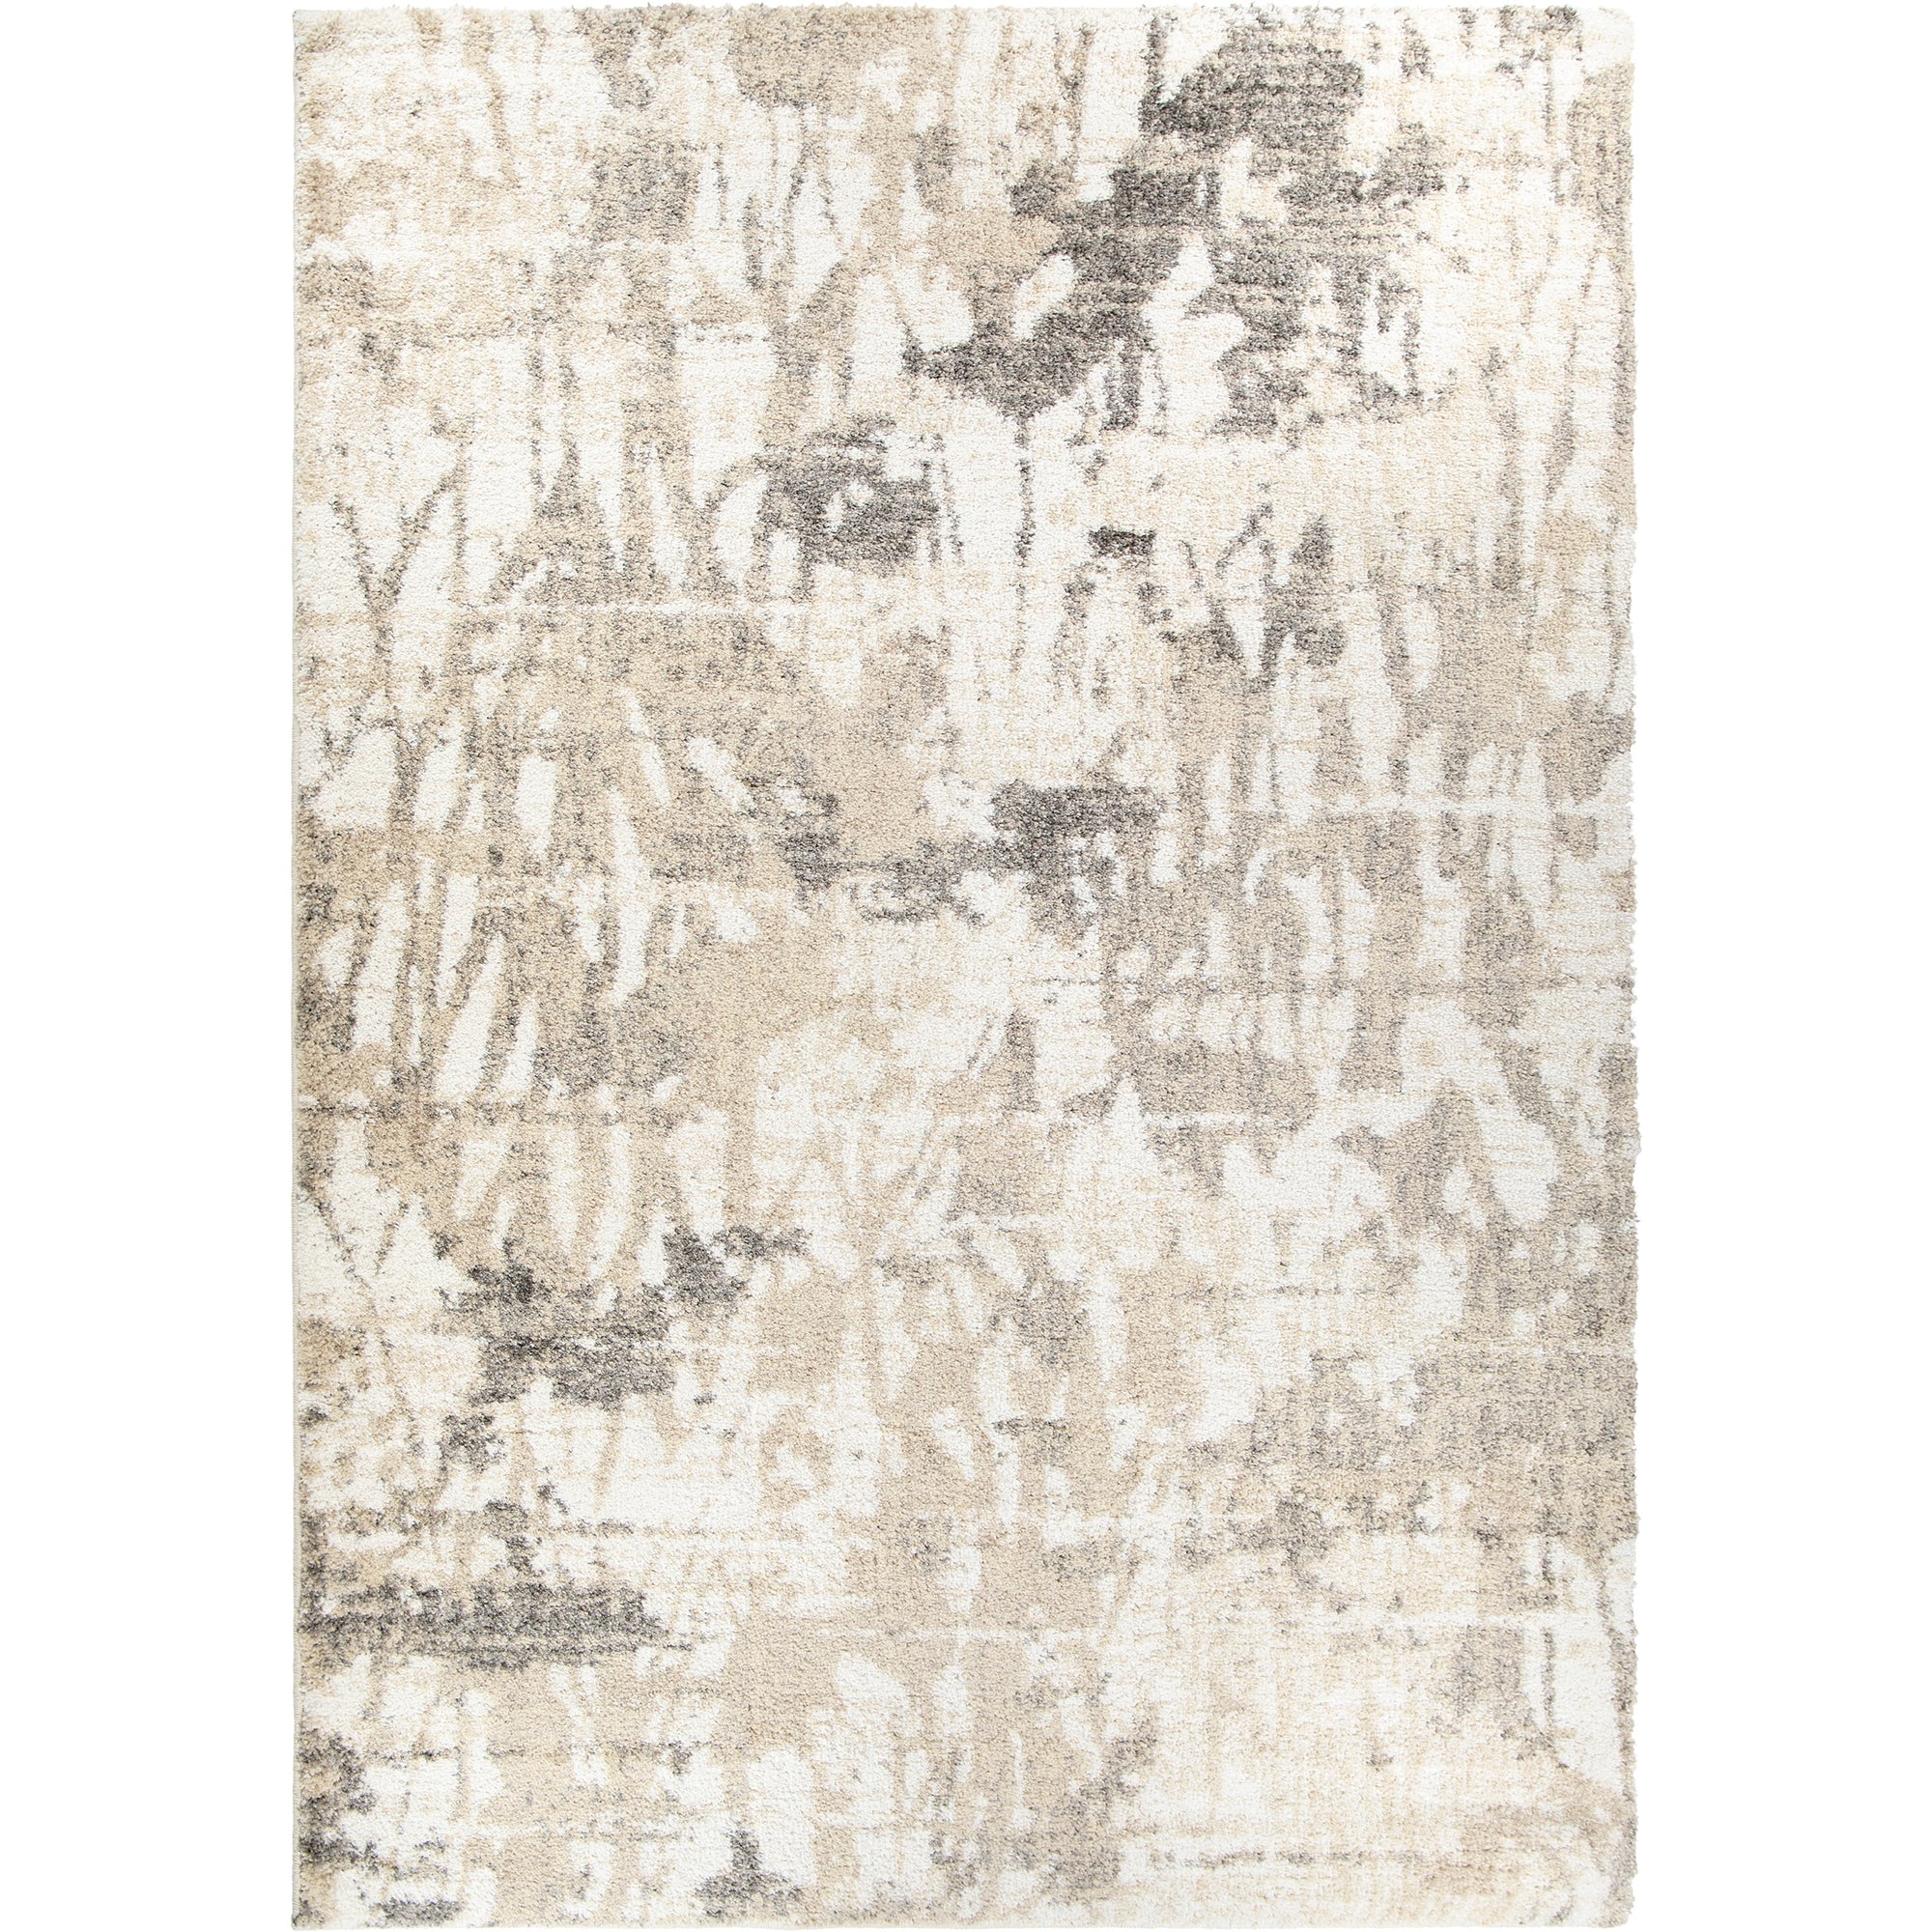 Palmetto Living Mystical Abstract Canopy   Natural Area Rug - 7'10" x 10'10"